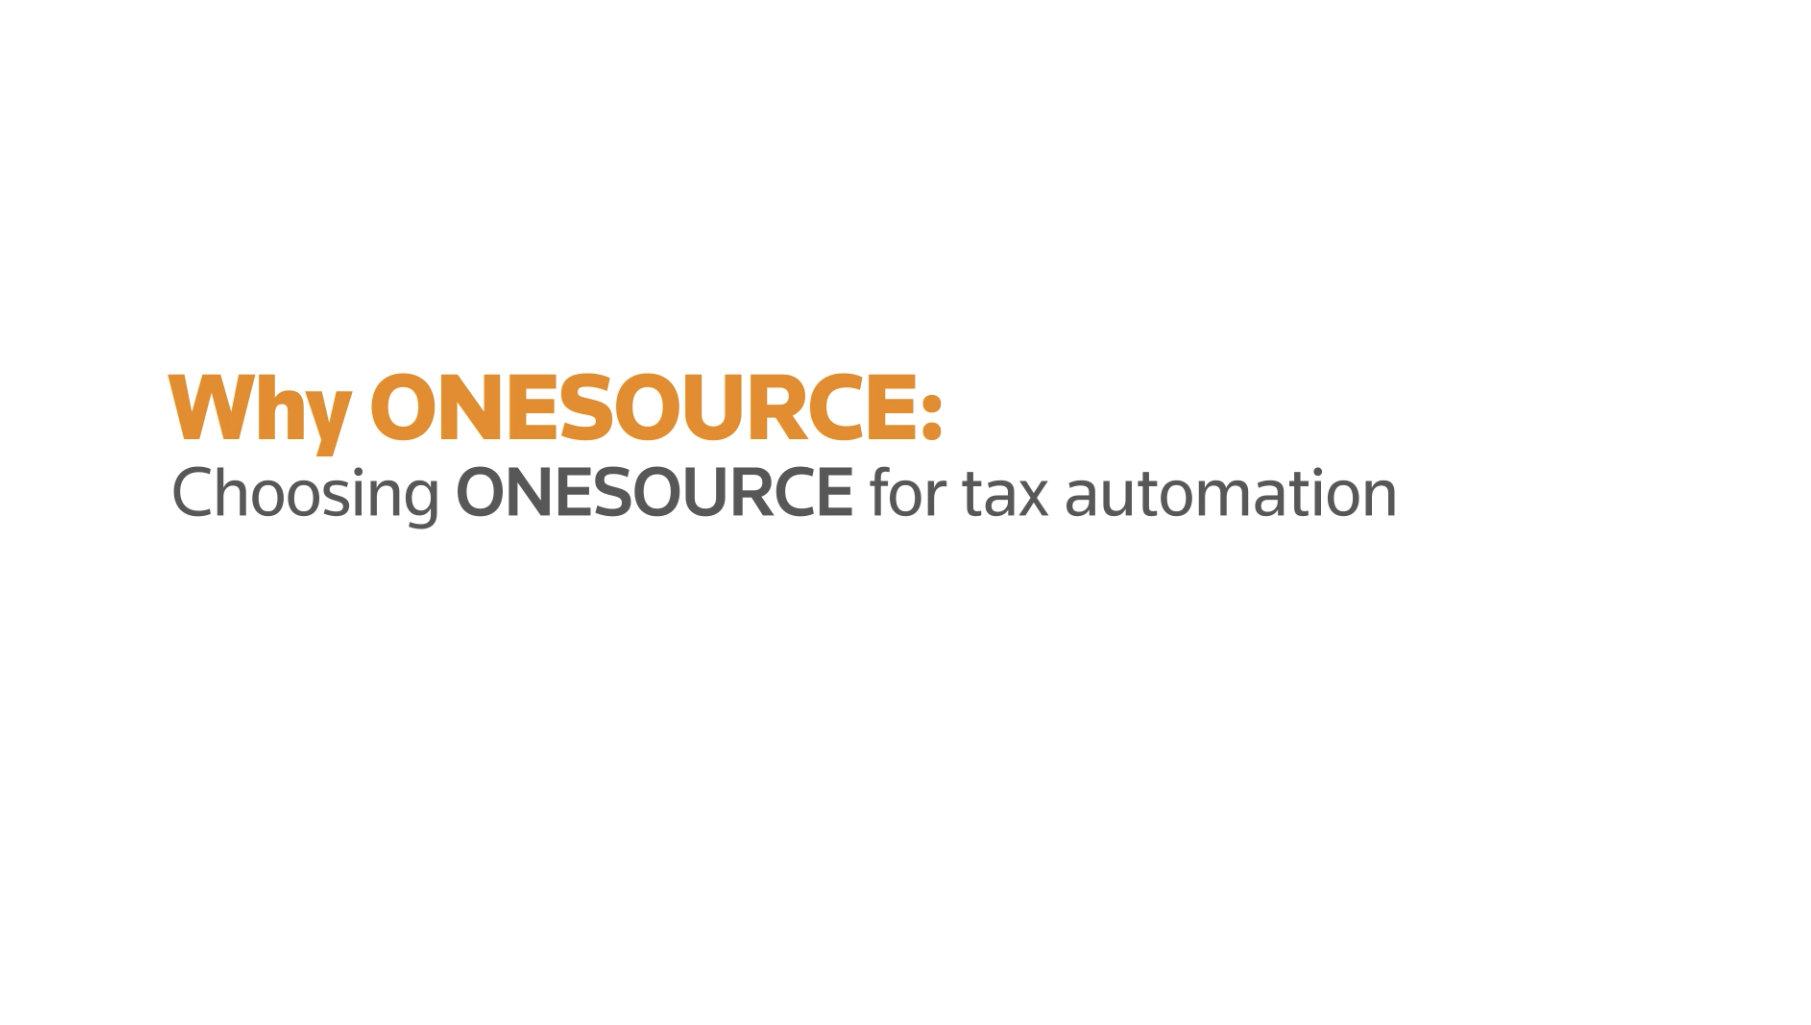 Why corporate tax departments choose ONESOURCE